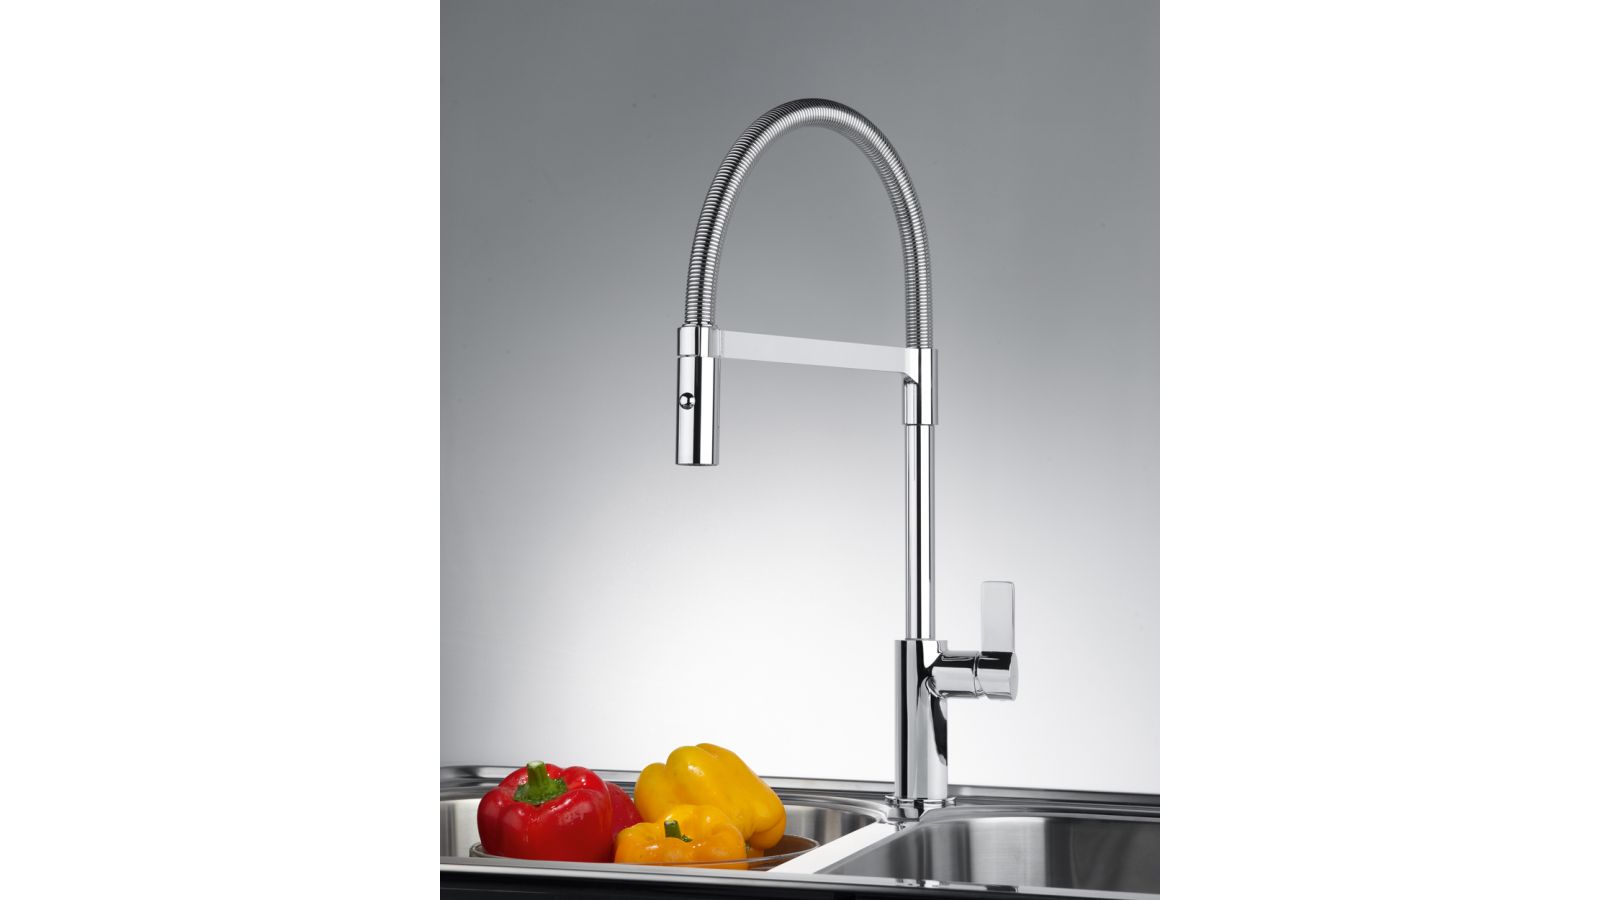 Ambient Series of Kitchen Faucets